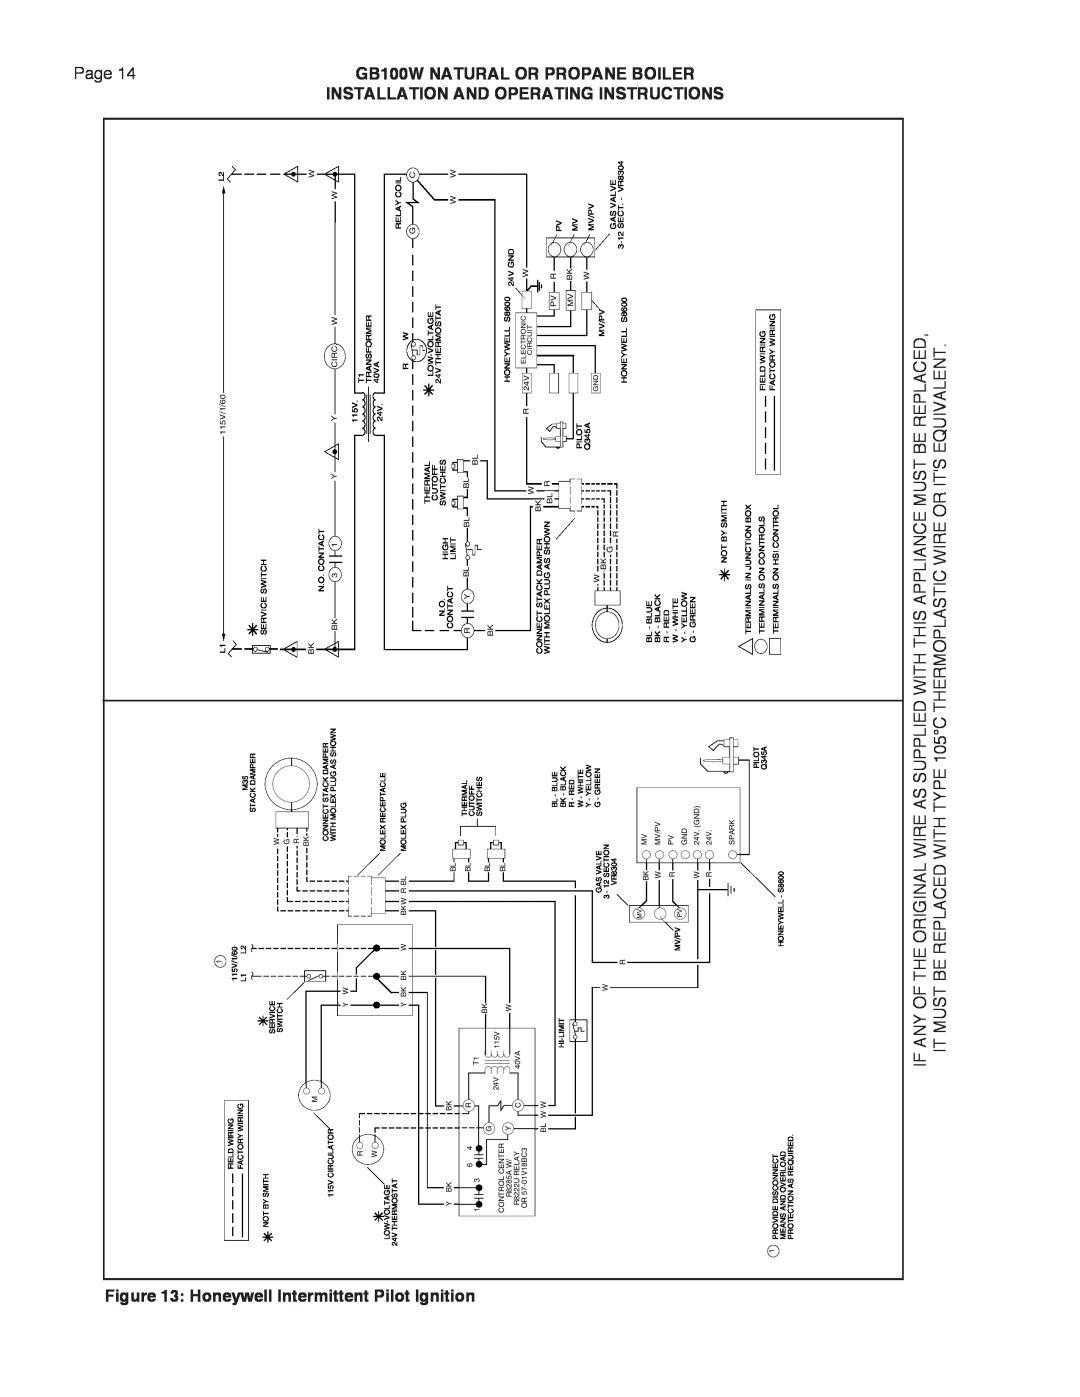 Smith Cast Iron Boilers manual Page, Honeywell Intermittent Pilot Ignition, GB100W NATURAL OR PROPANE BOILER, Assupplied 